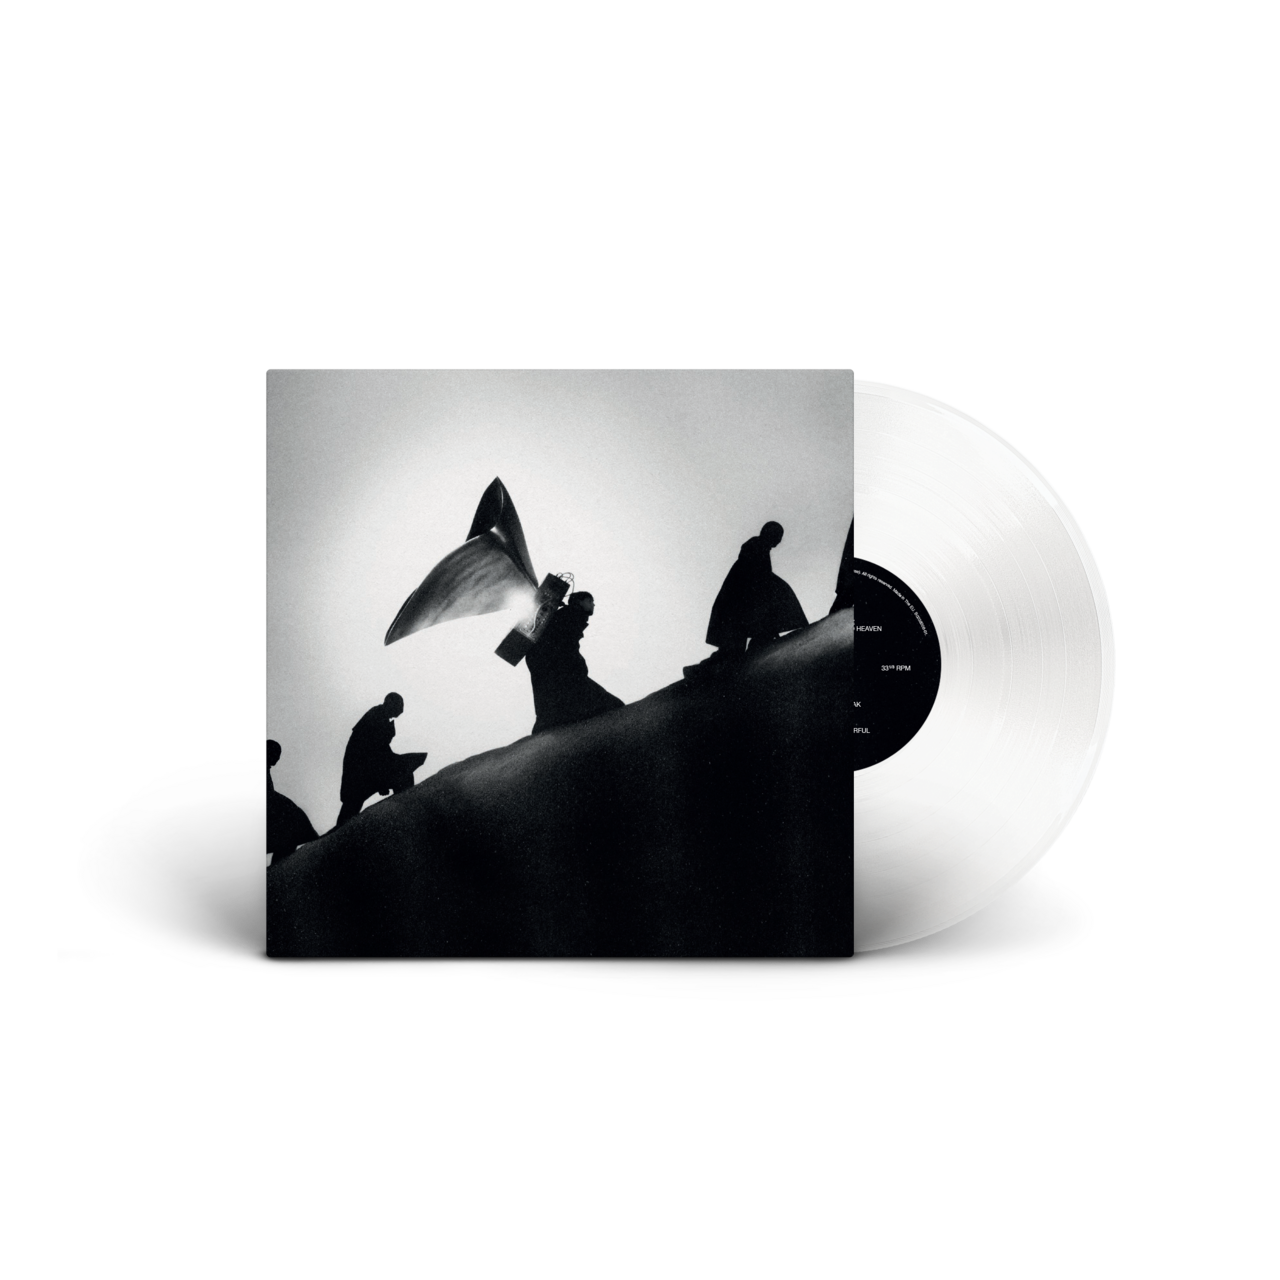 James Blake - Playing Robots Into Heaven (Store Exclusive Crystal Clear Gatefold Vinyl)